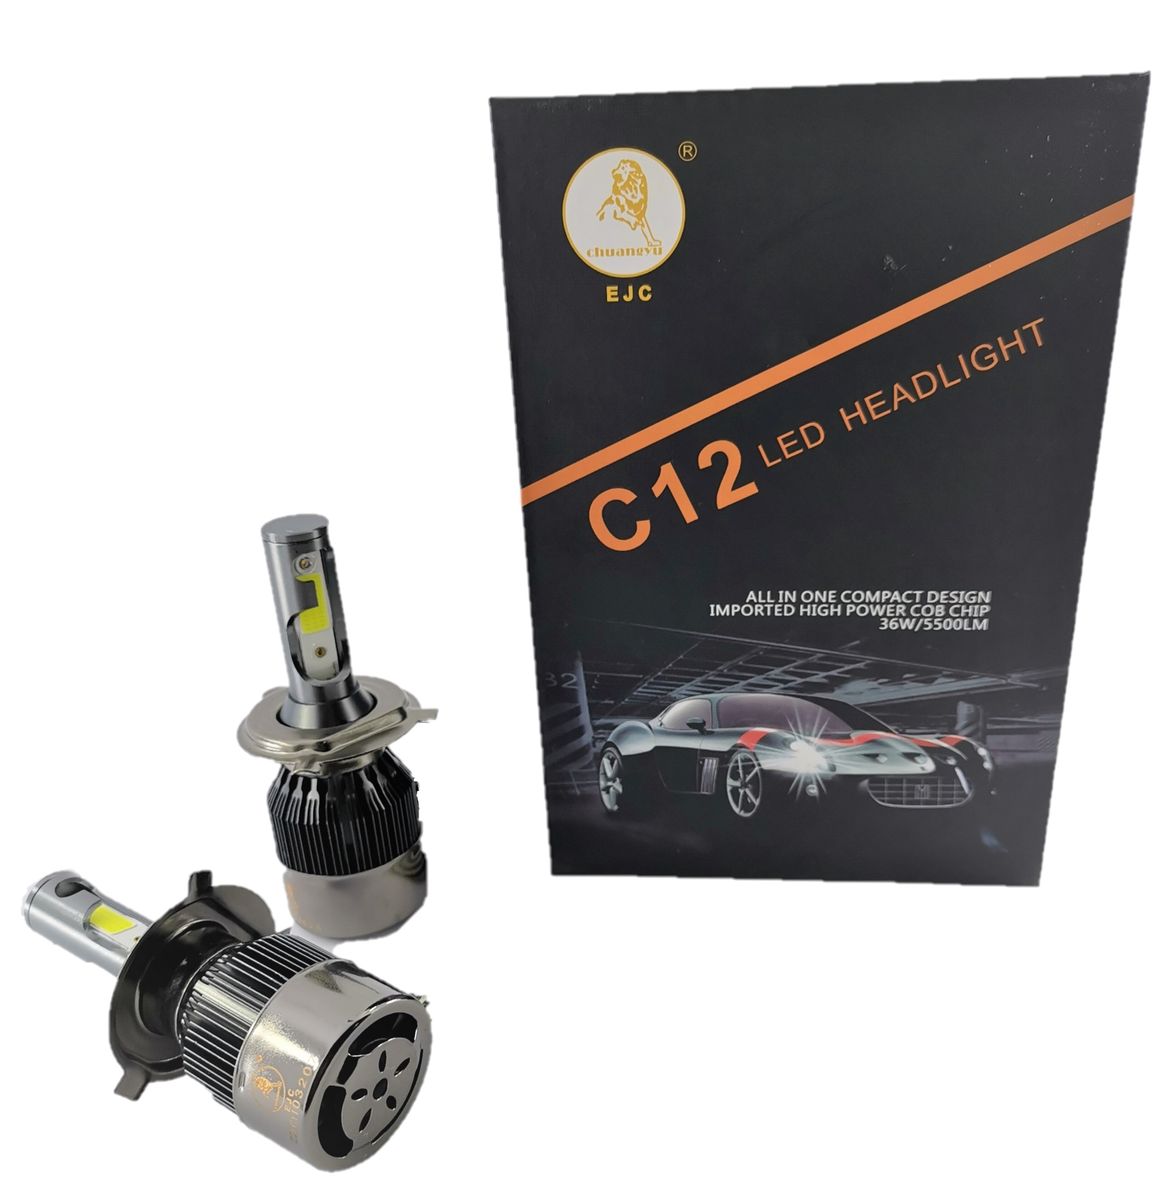 C12-H4 LED Headlight All In One Compact Design, Shop Today. Get it Tomorrow!